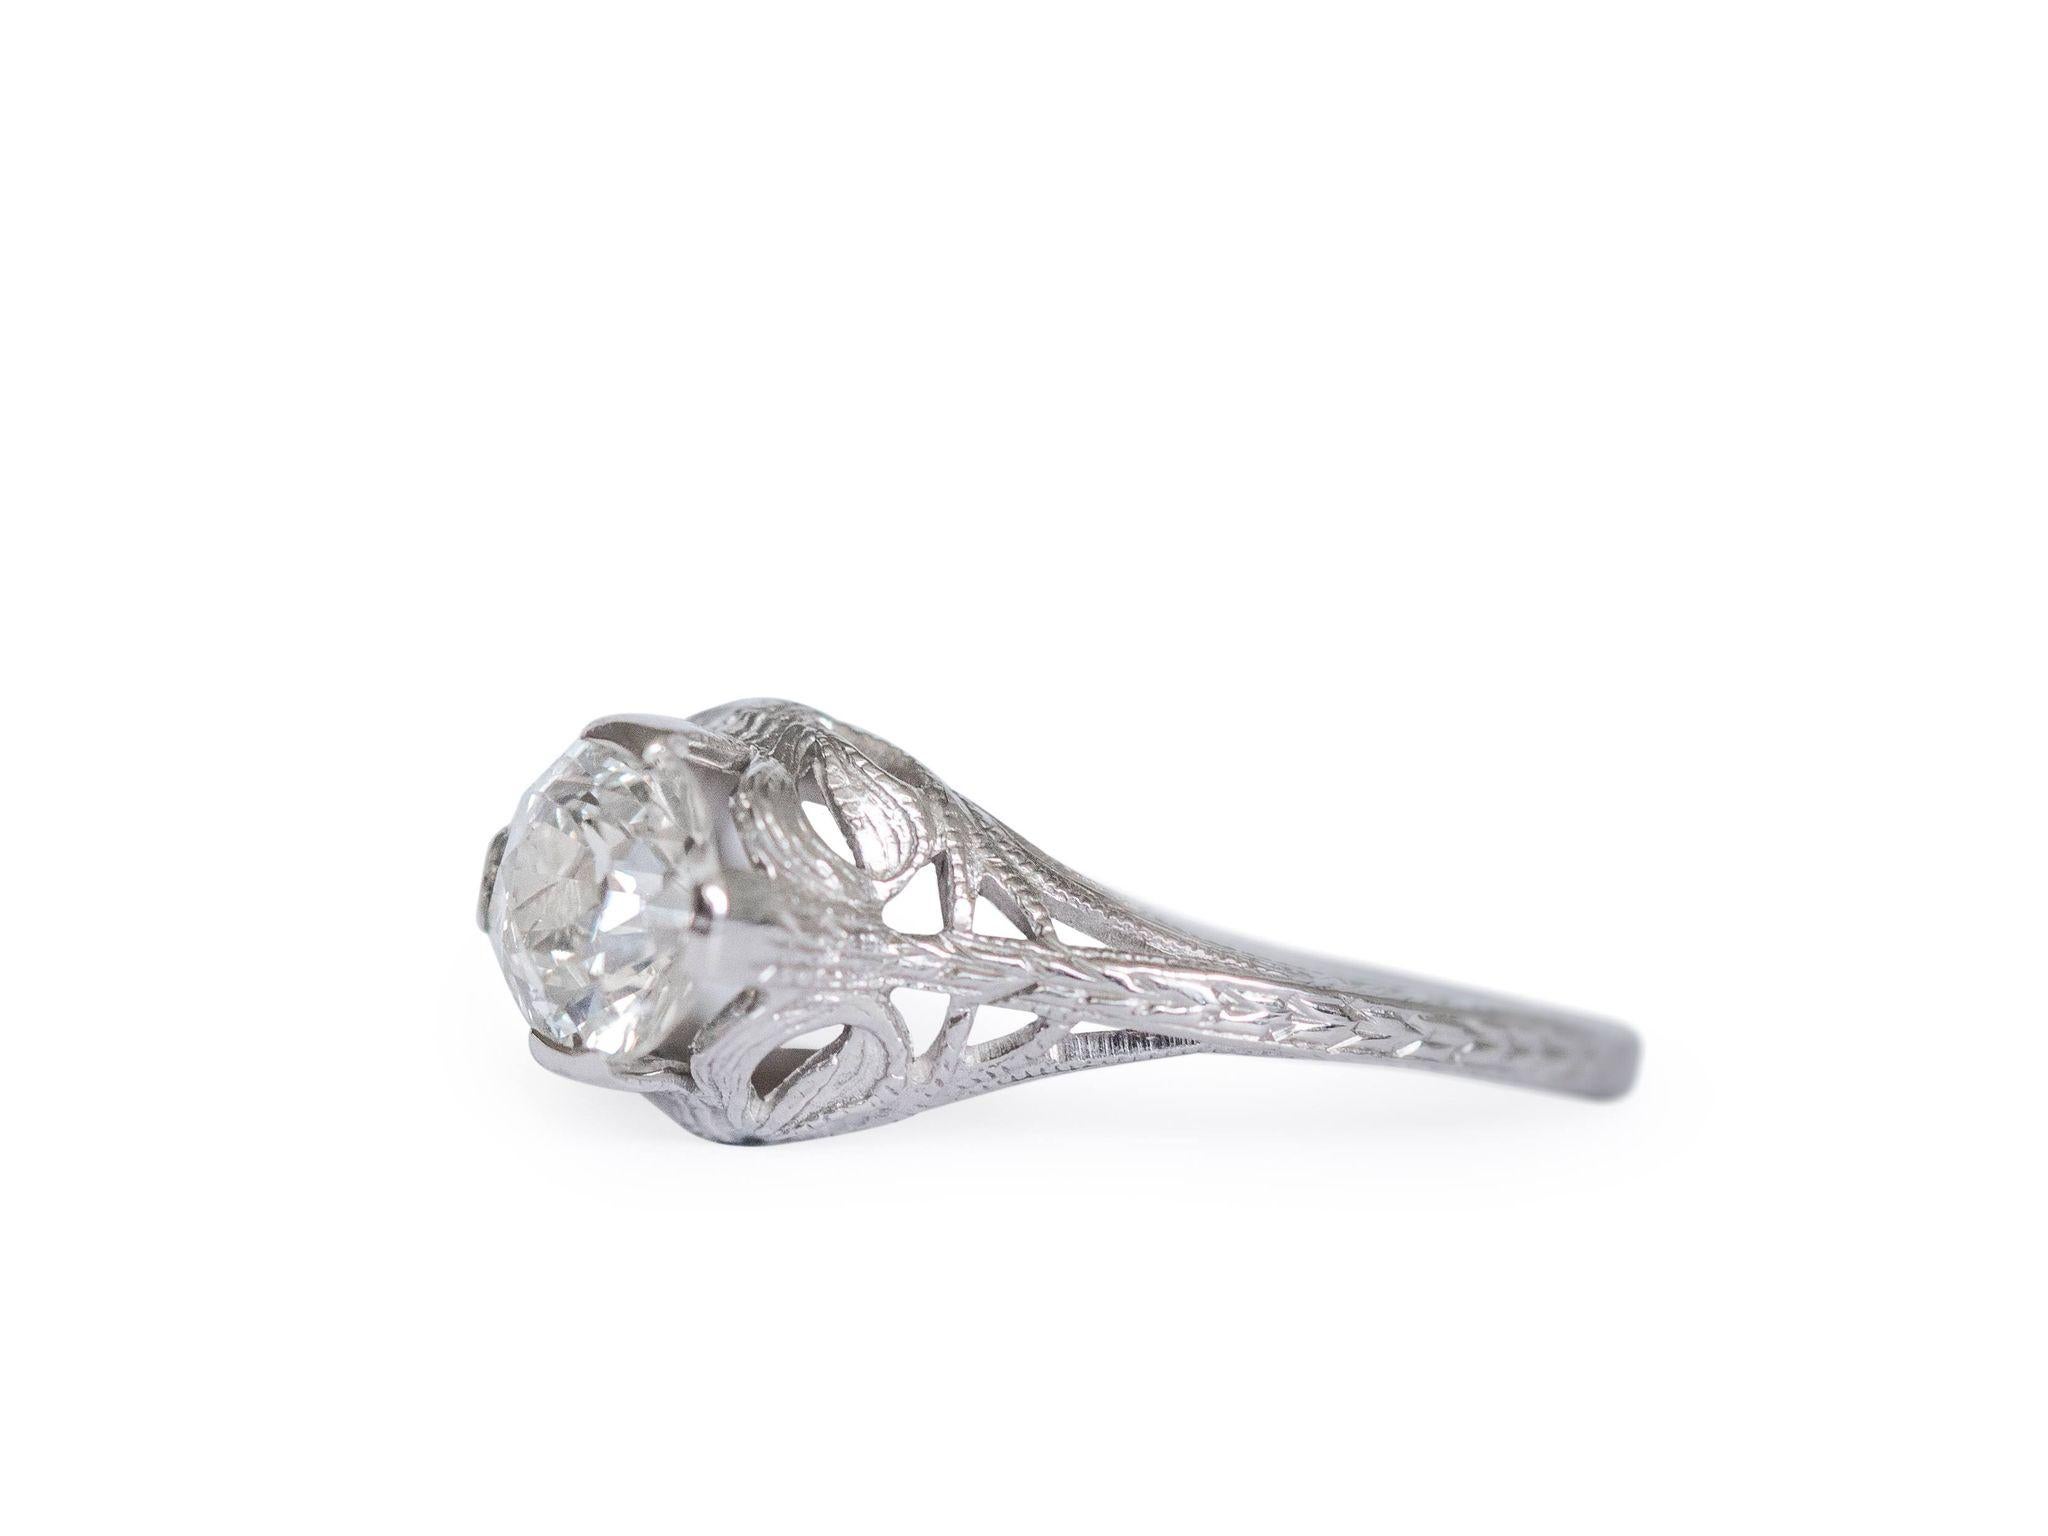 This Art Deco solitaire is a fine example of a filigree solitaire engagement ring crafted in 18 karat white gold. The old european cut diamond is held high in four prongs showcasing the solitaire from all sides! Flowing down from the sparkling